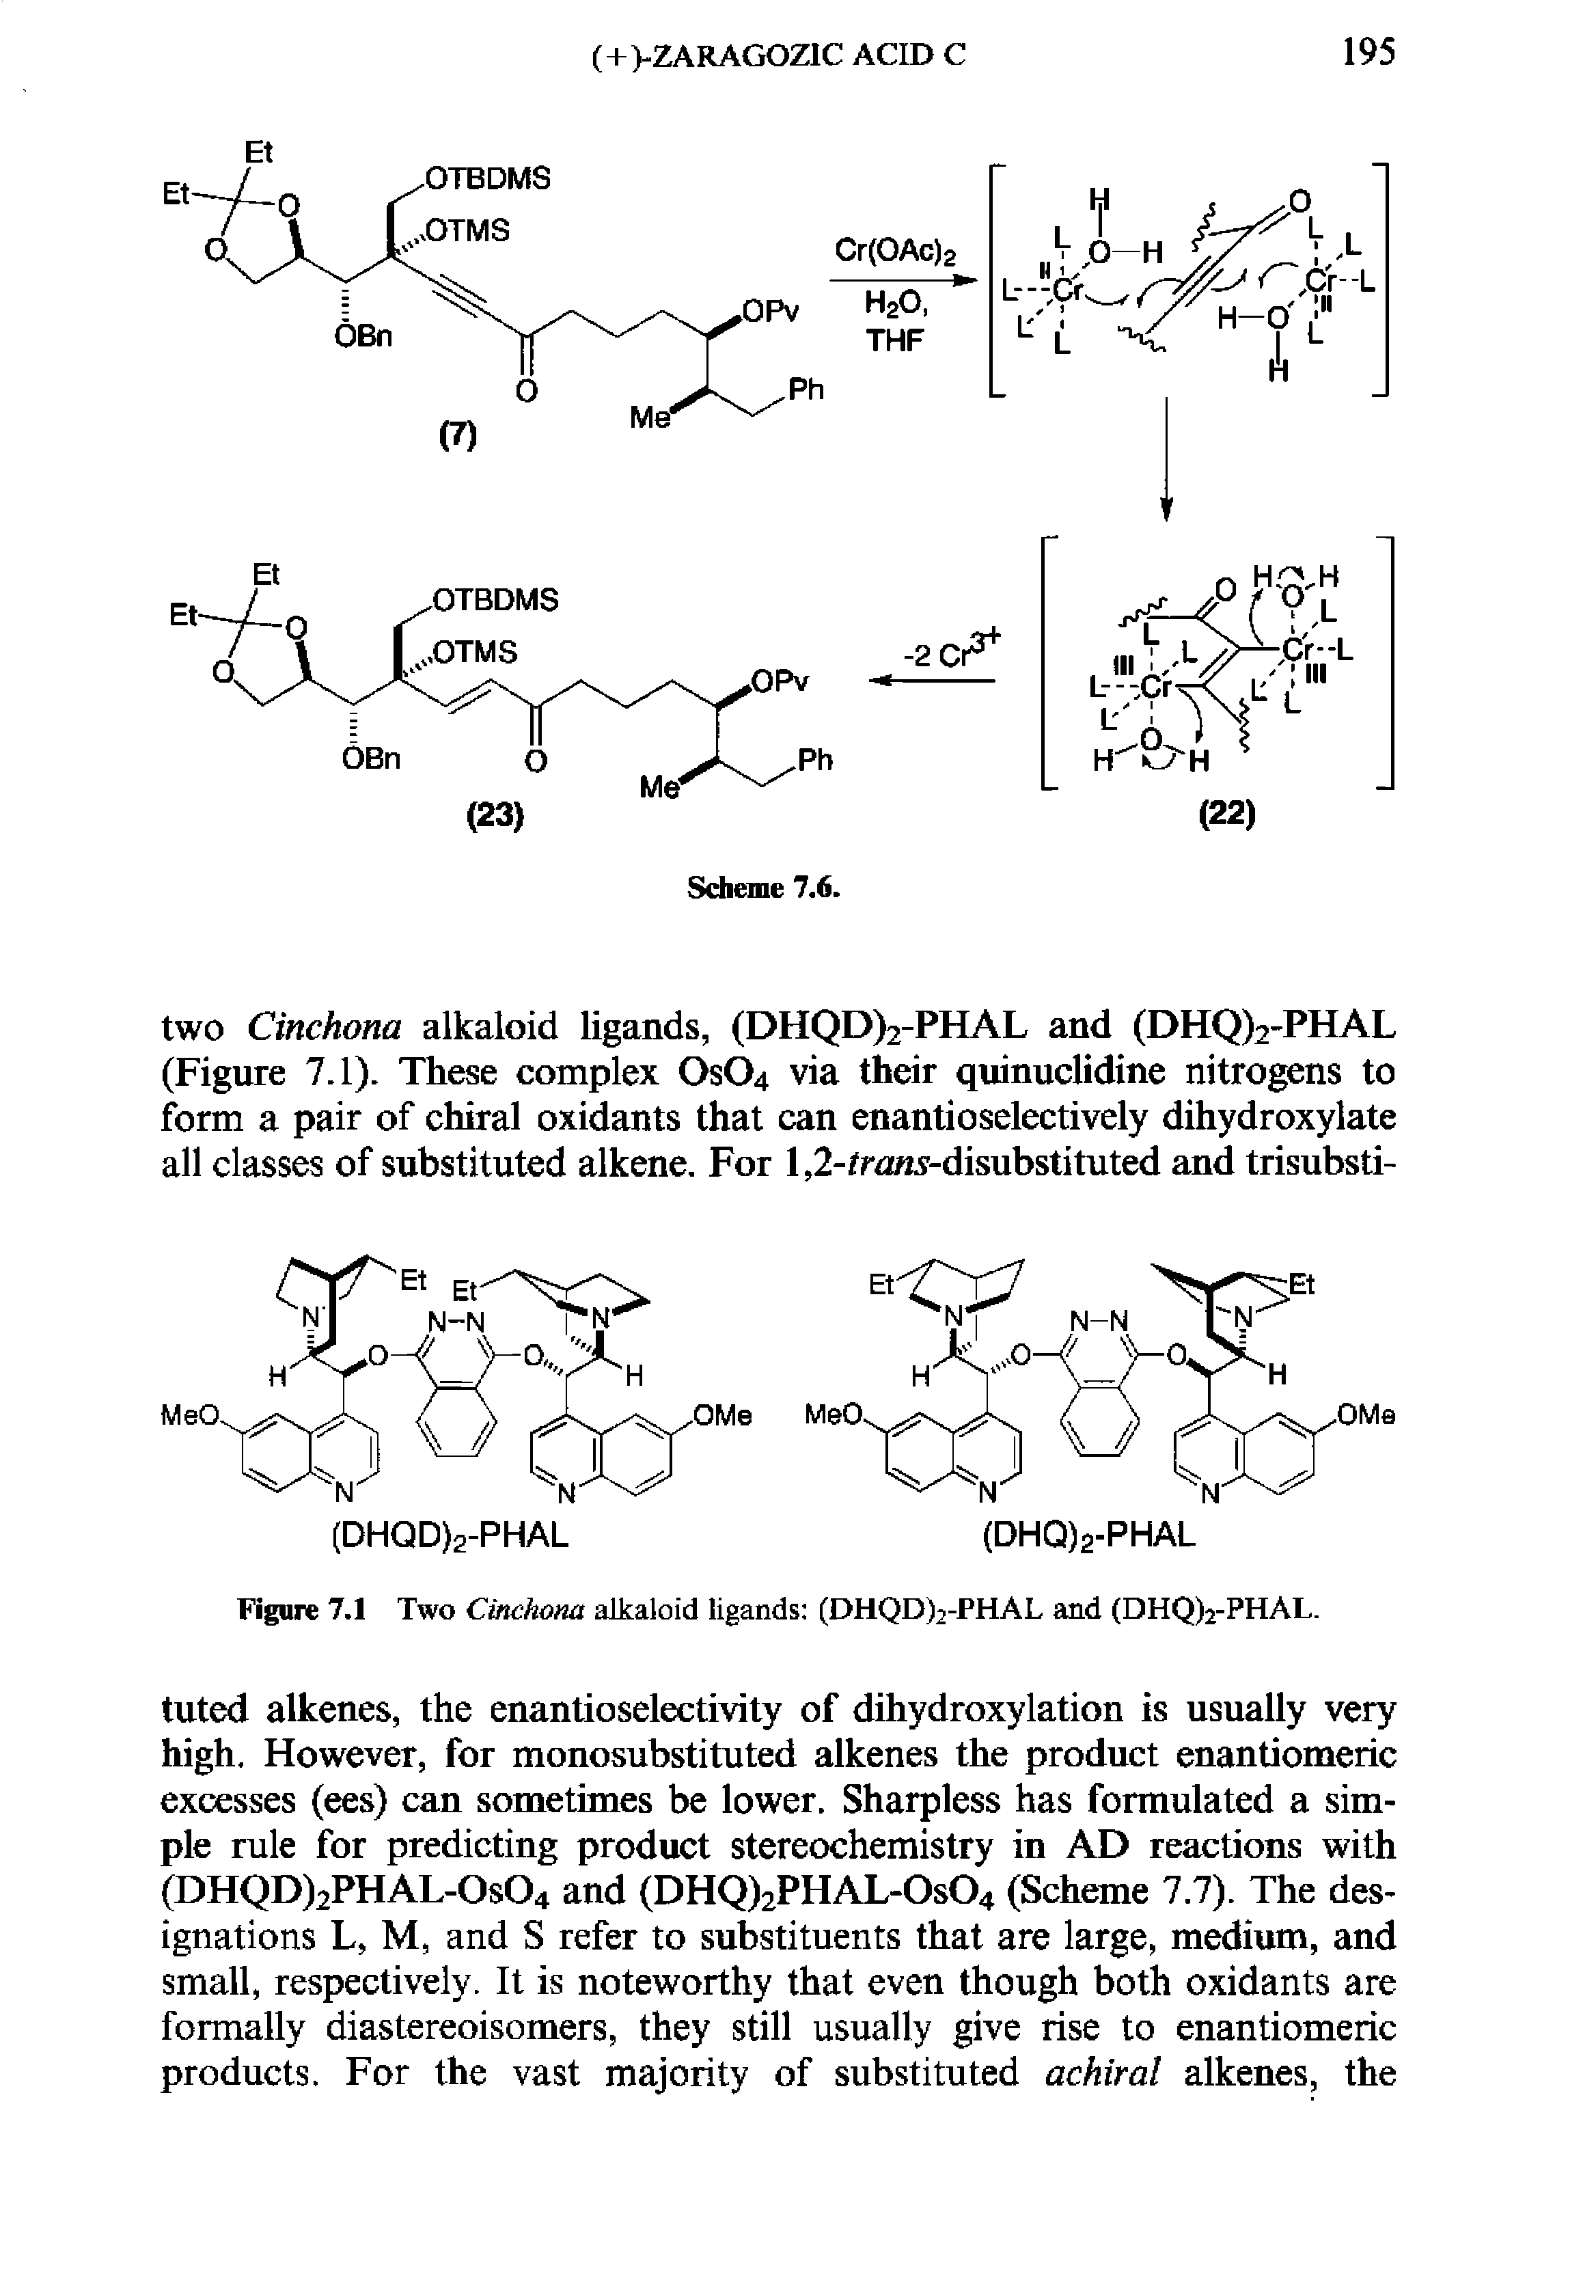 Figure 7.1 Two Cinchona alkaloid ligands (DHQD)2-PHAL and (DHQ)2-PHAL.